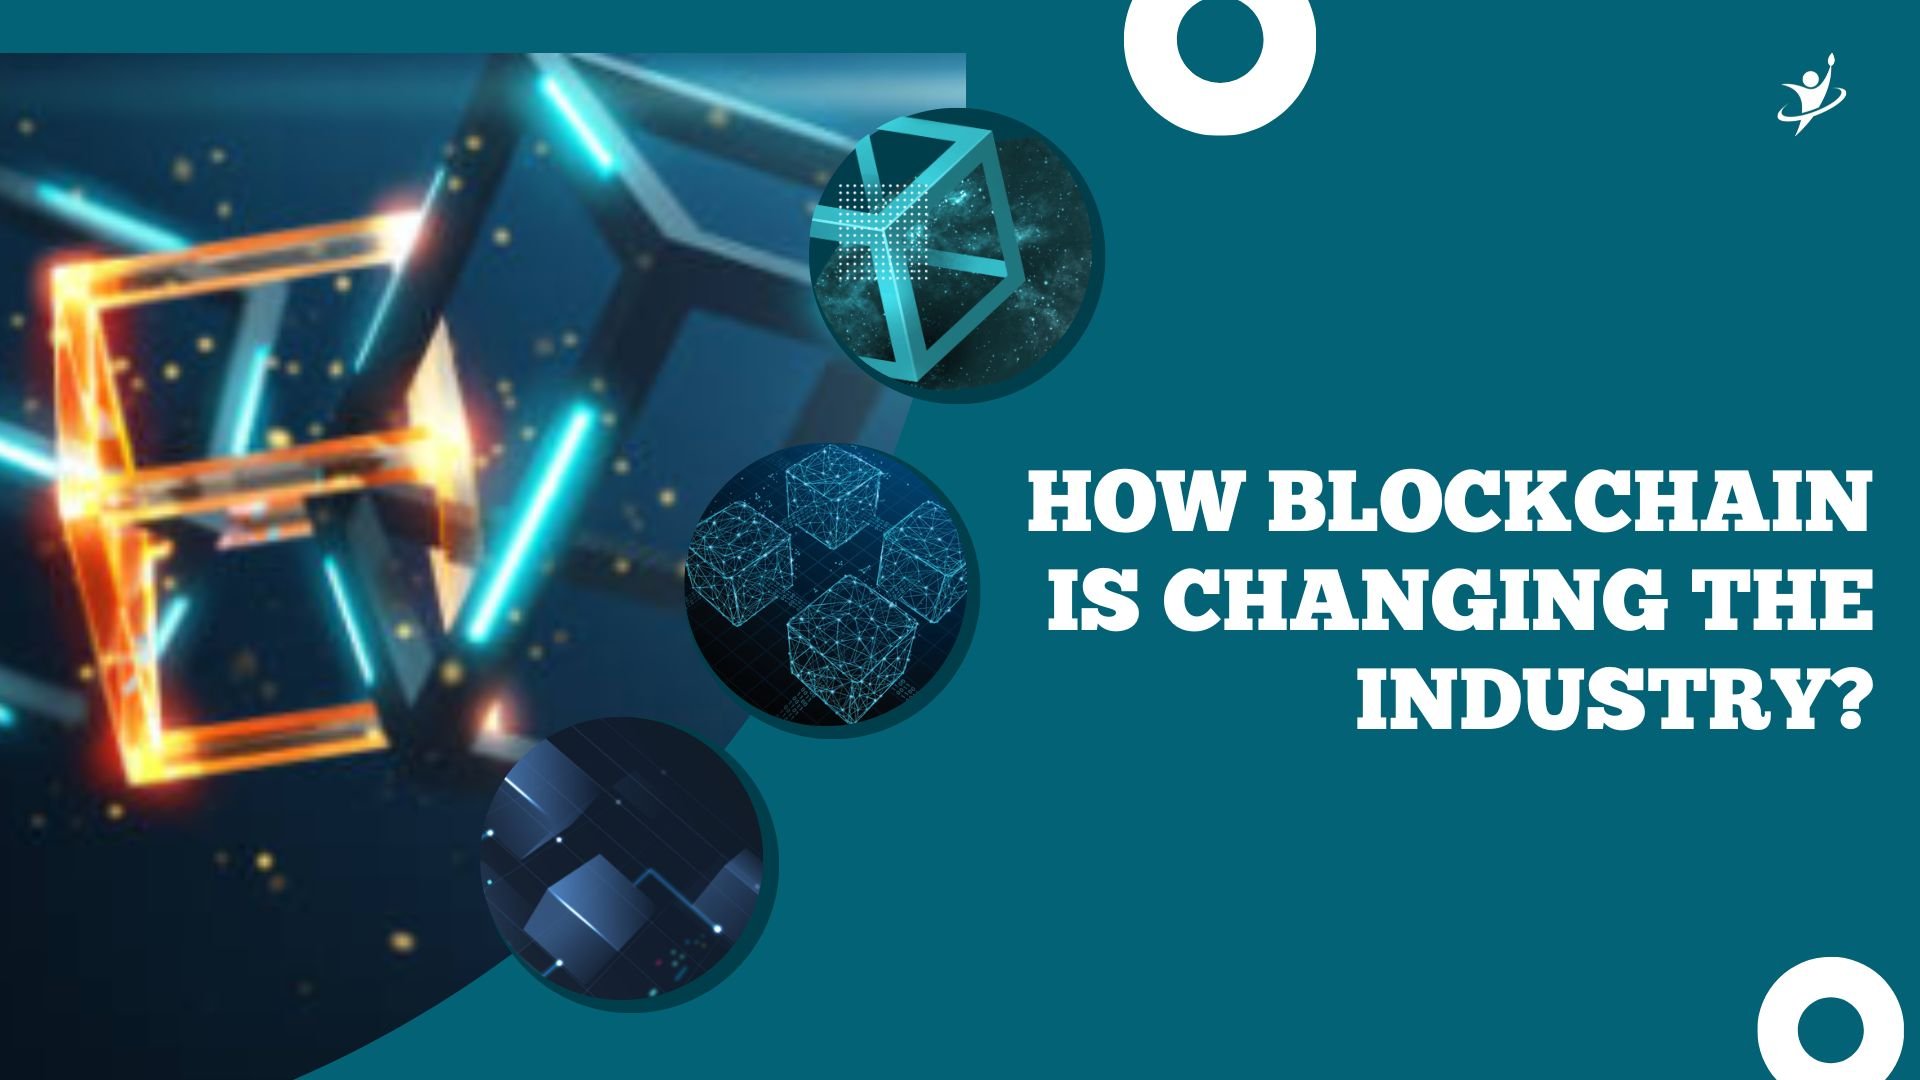 How Blockchain is Changing the Industry?